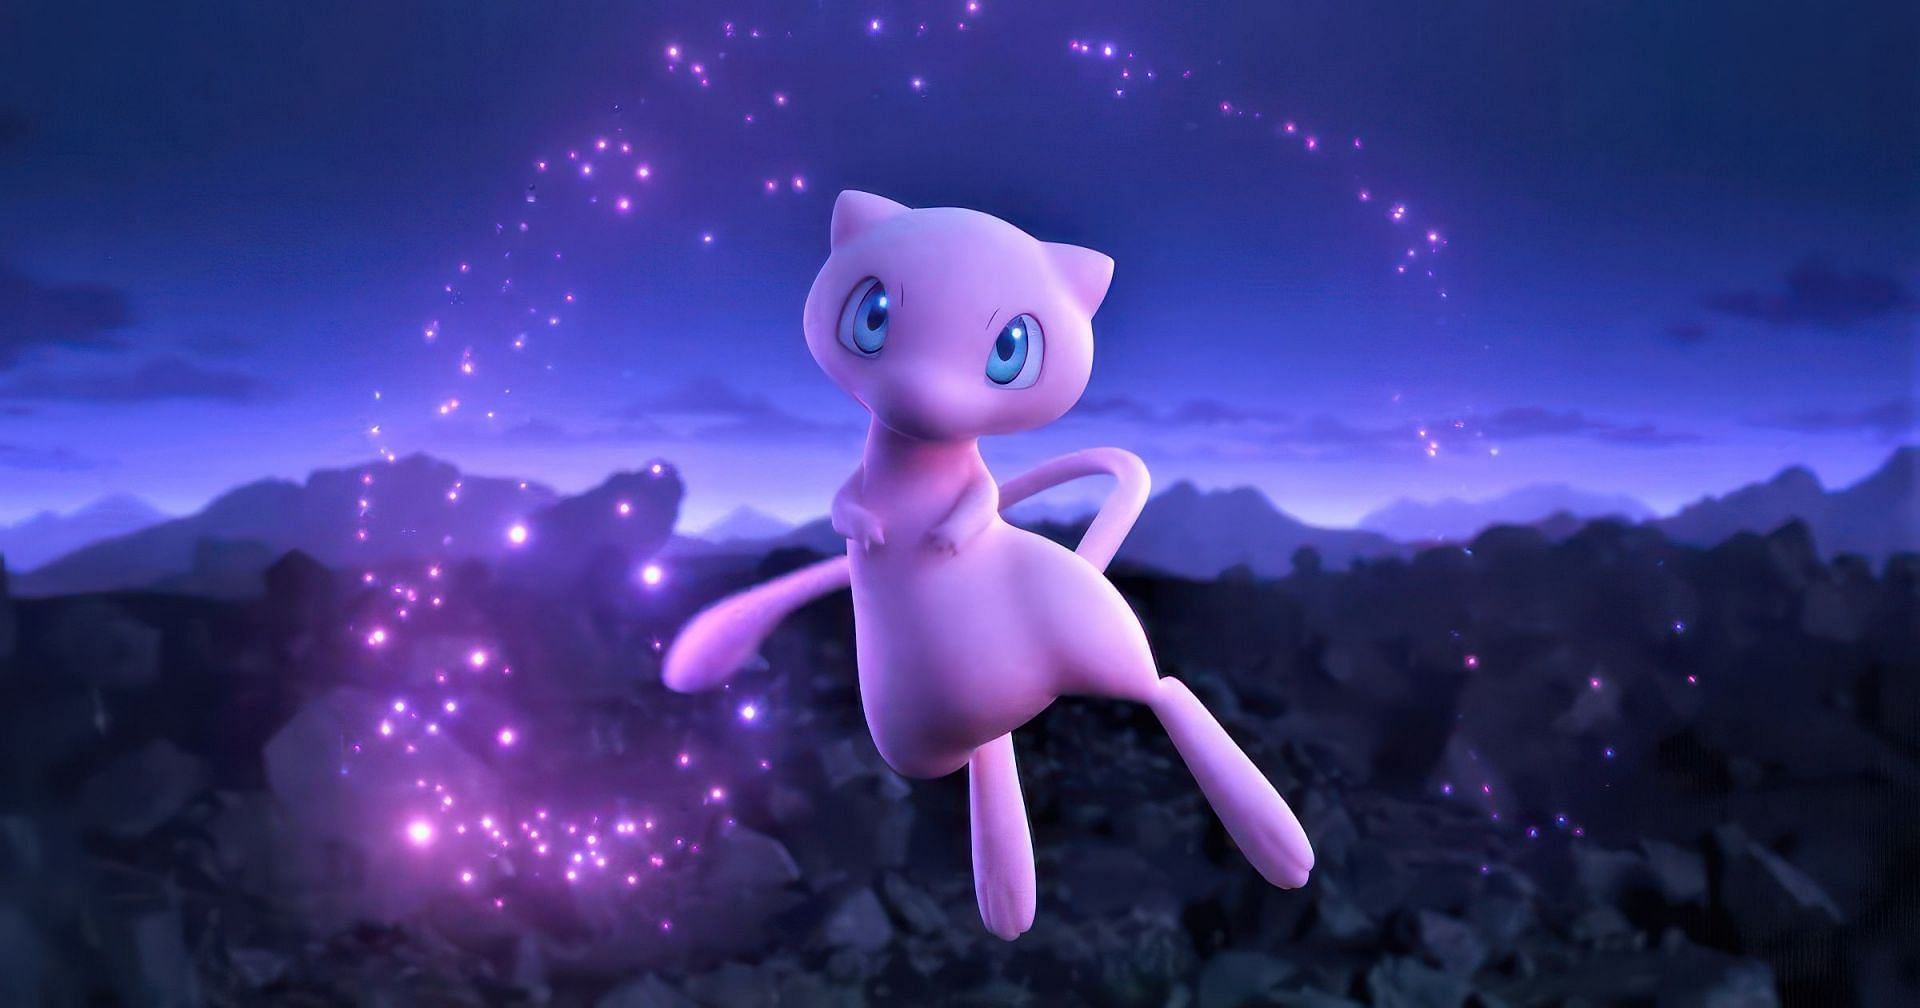 Mew as seen in Scarlet and Violet (Image via The Pokemon Company)